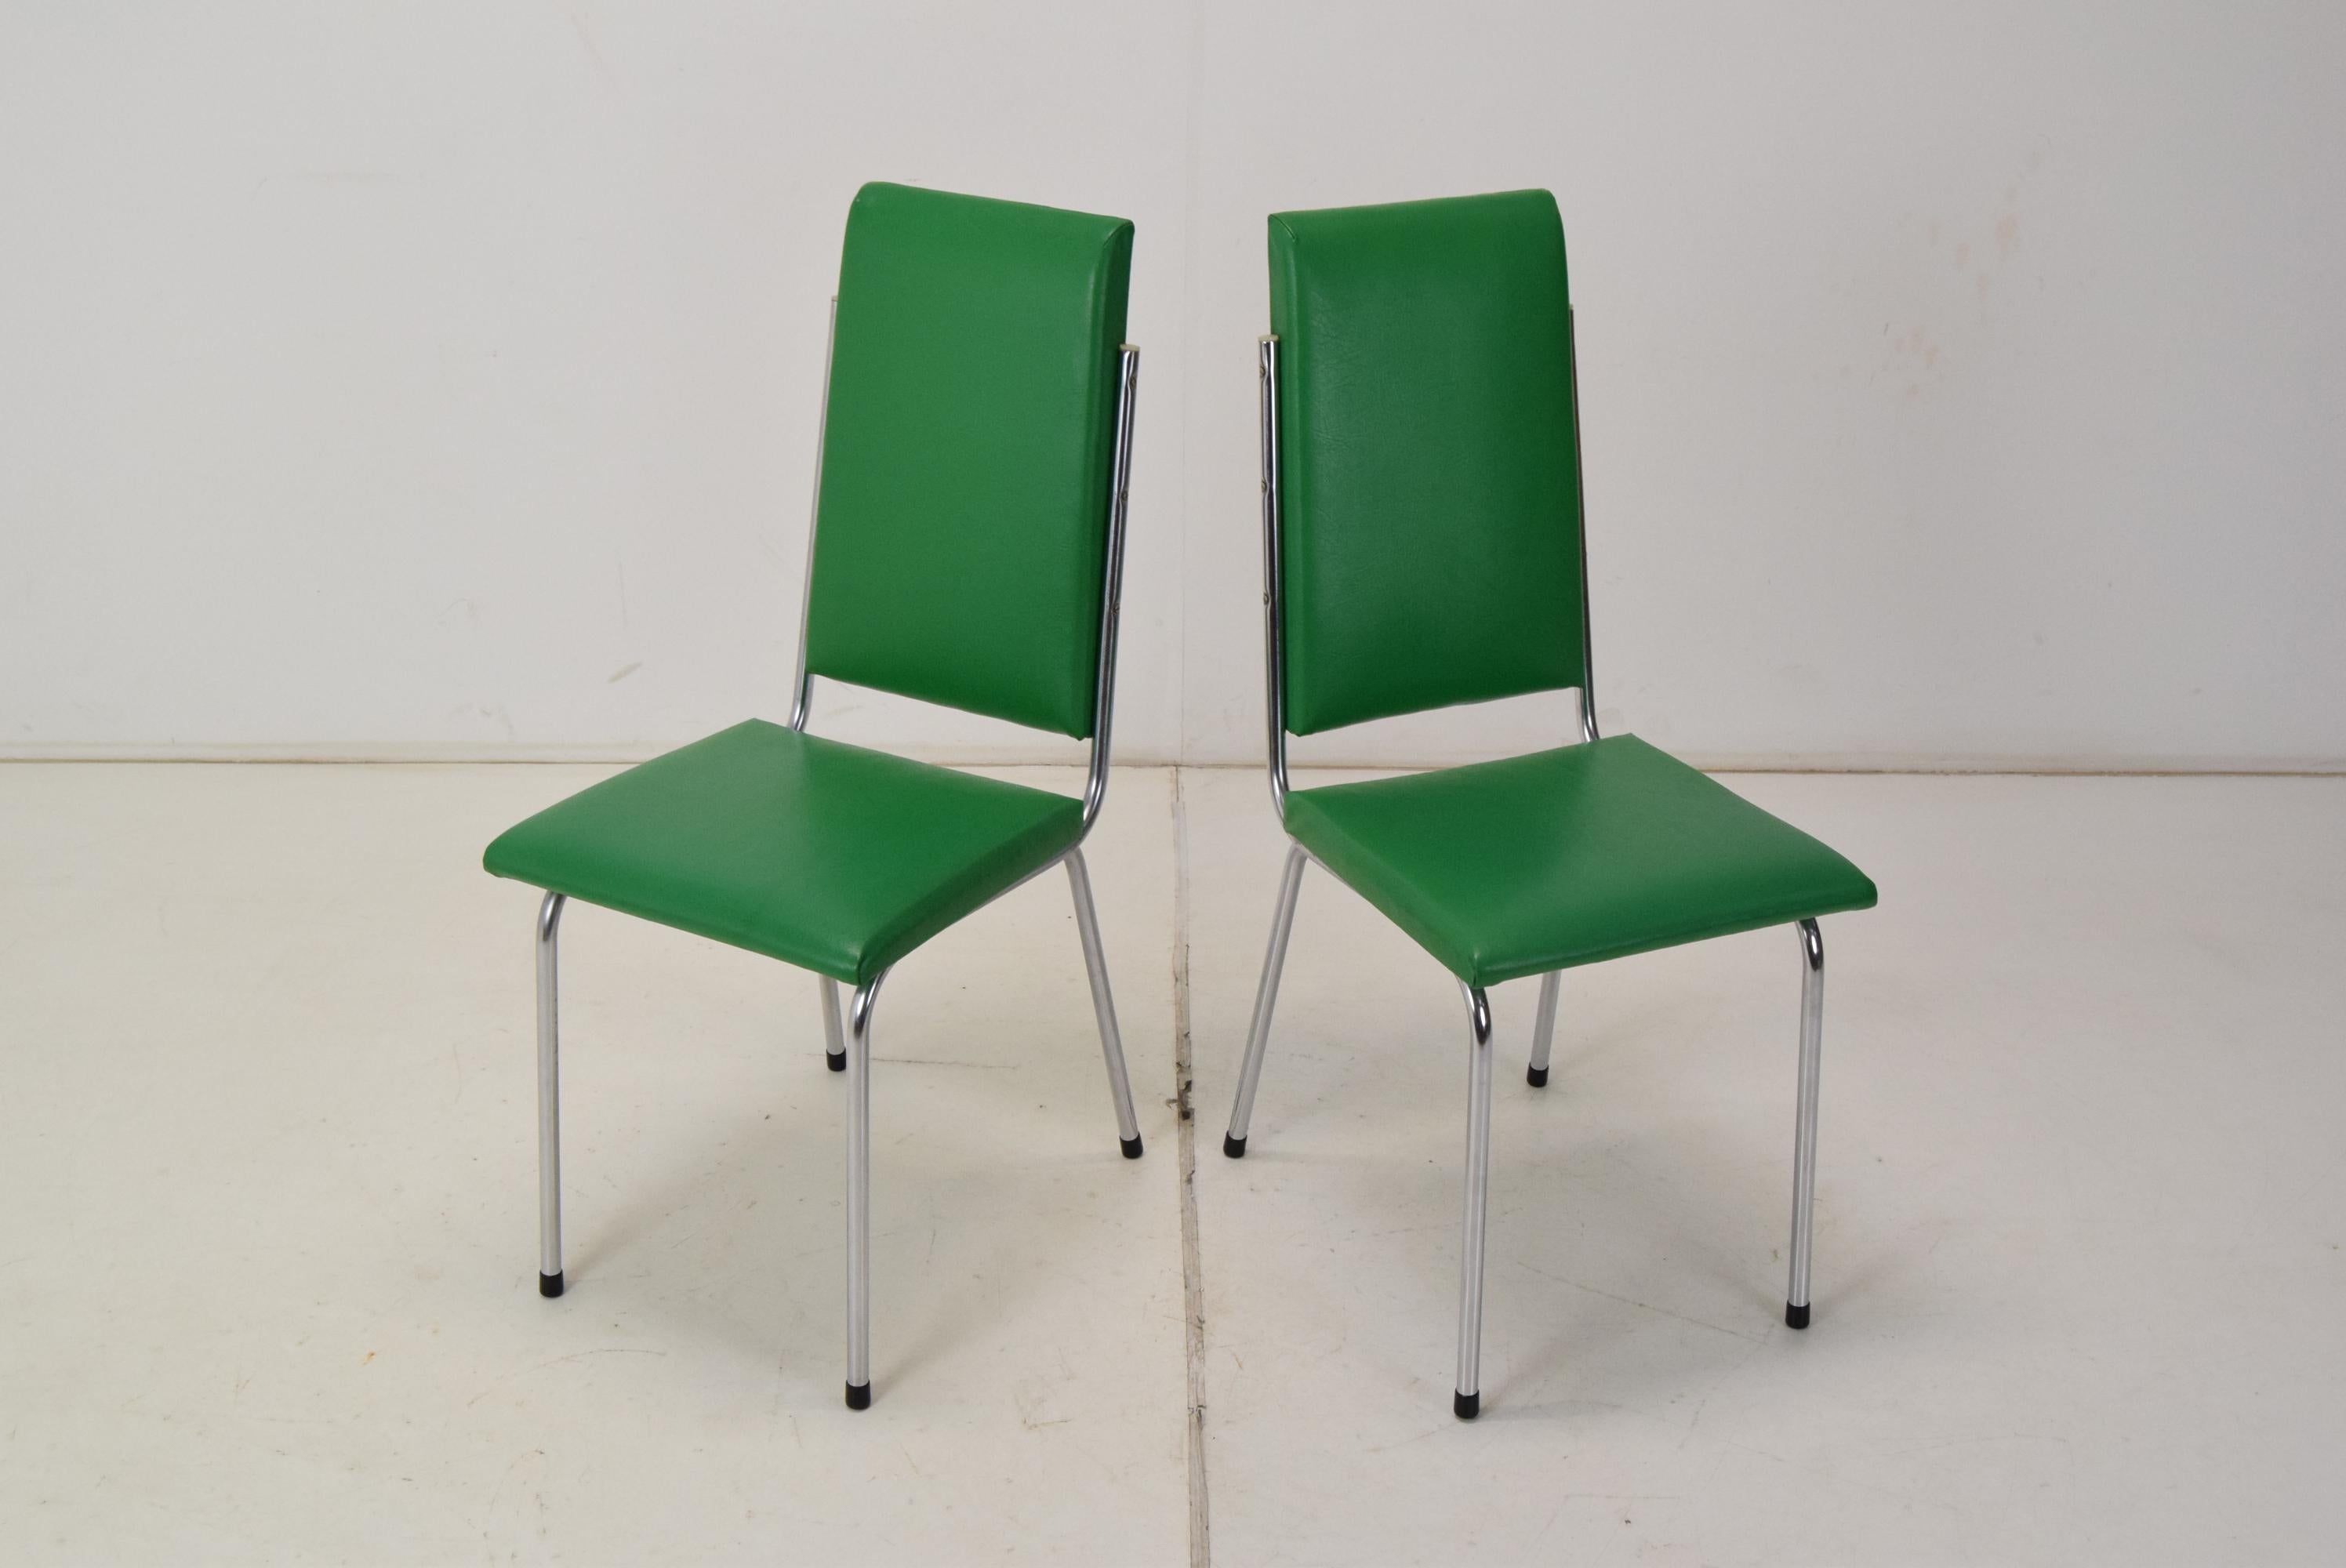 
Made of Leatherette,Metal,Chrome,Plastic
Seat Height is 46cm
Original condition